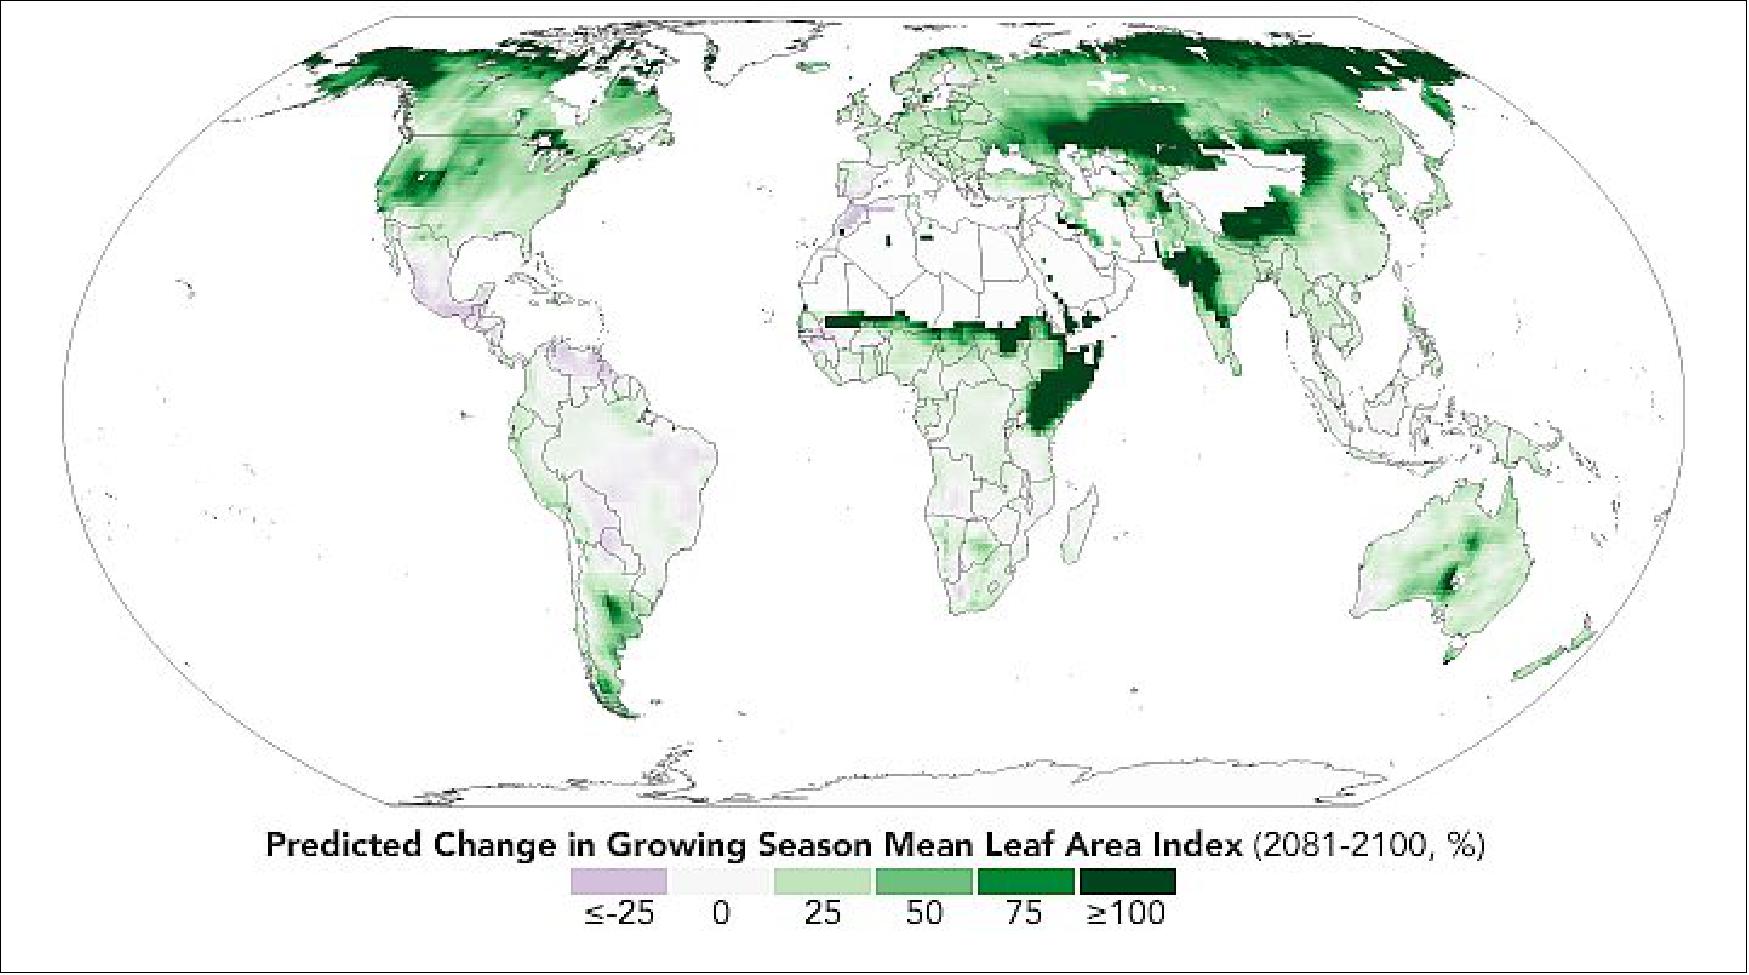 Figure 92: Projected greening effect for the period 2081-2100 (image credit: NASA Earth Observatory, image by Joshua Stevens, using data from Shilong, P., et al. (2020). Story by Kathryn Hansen)